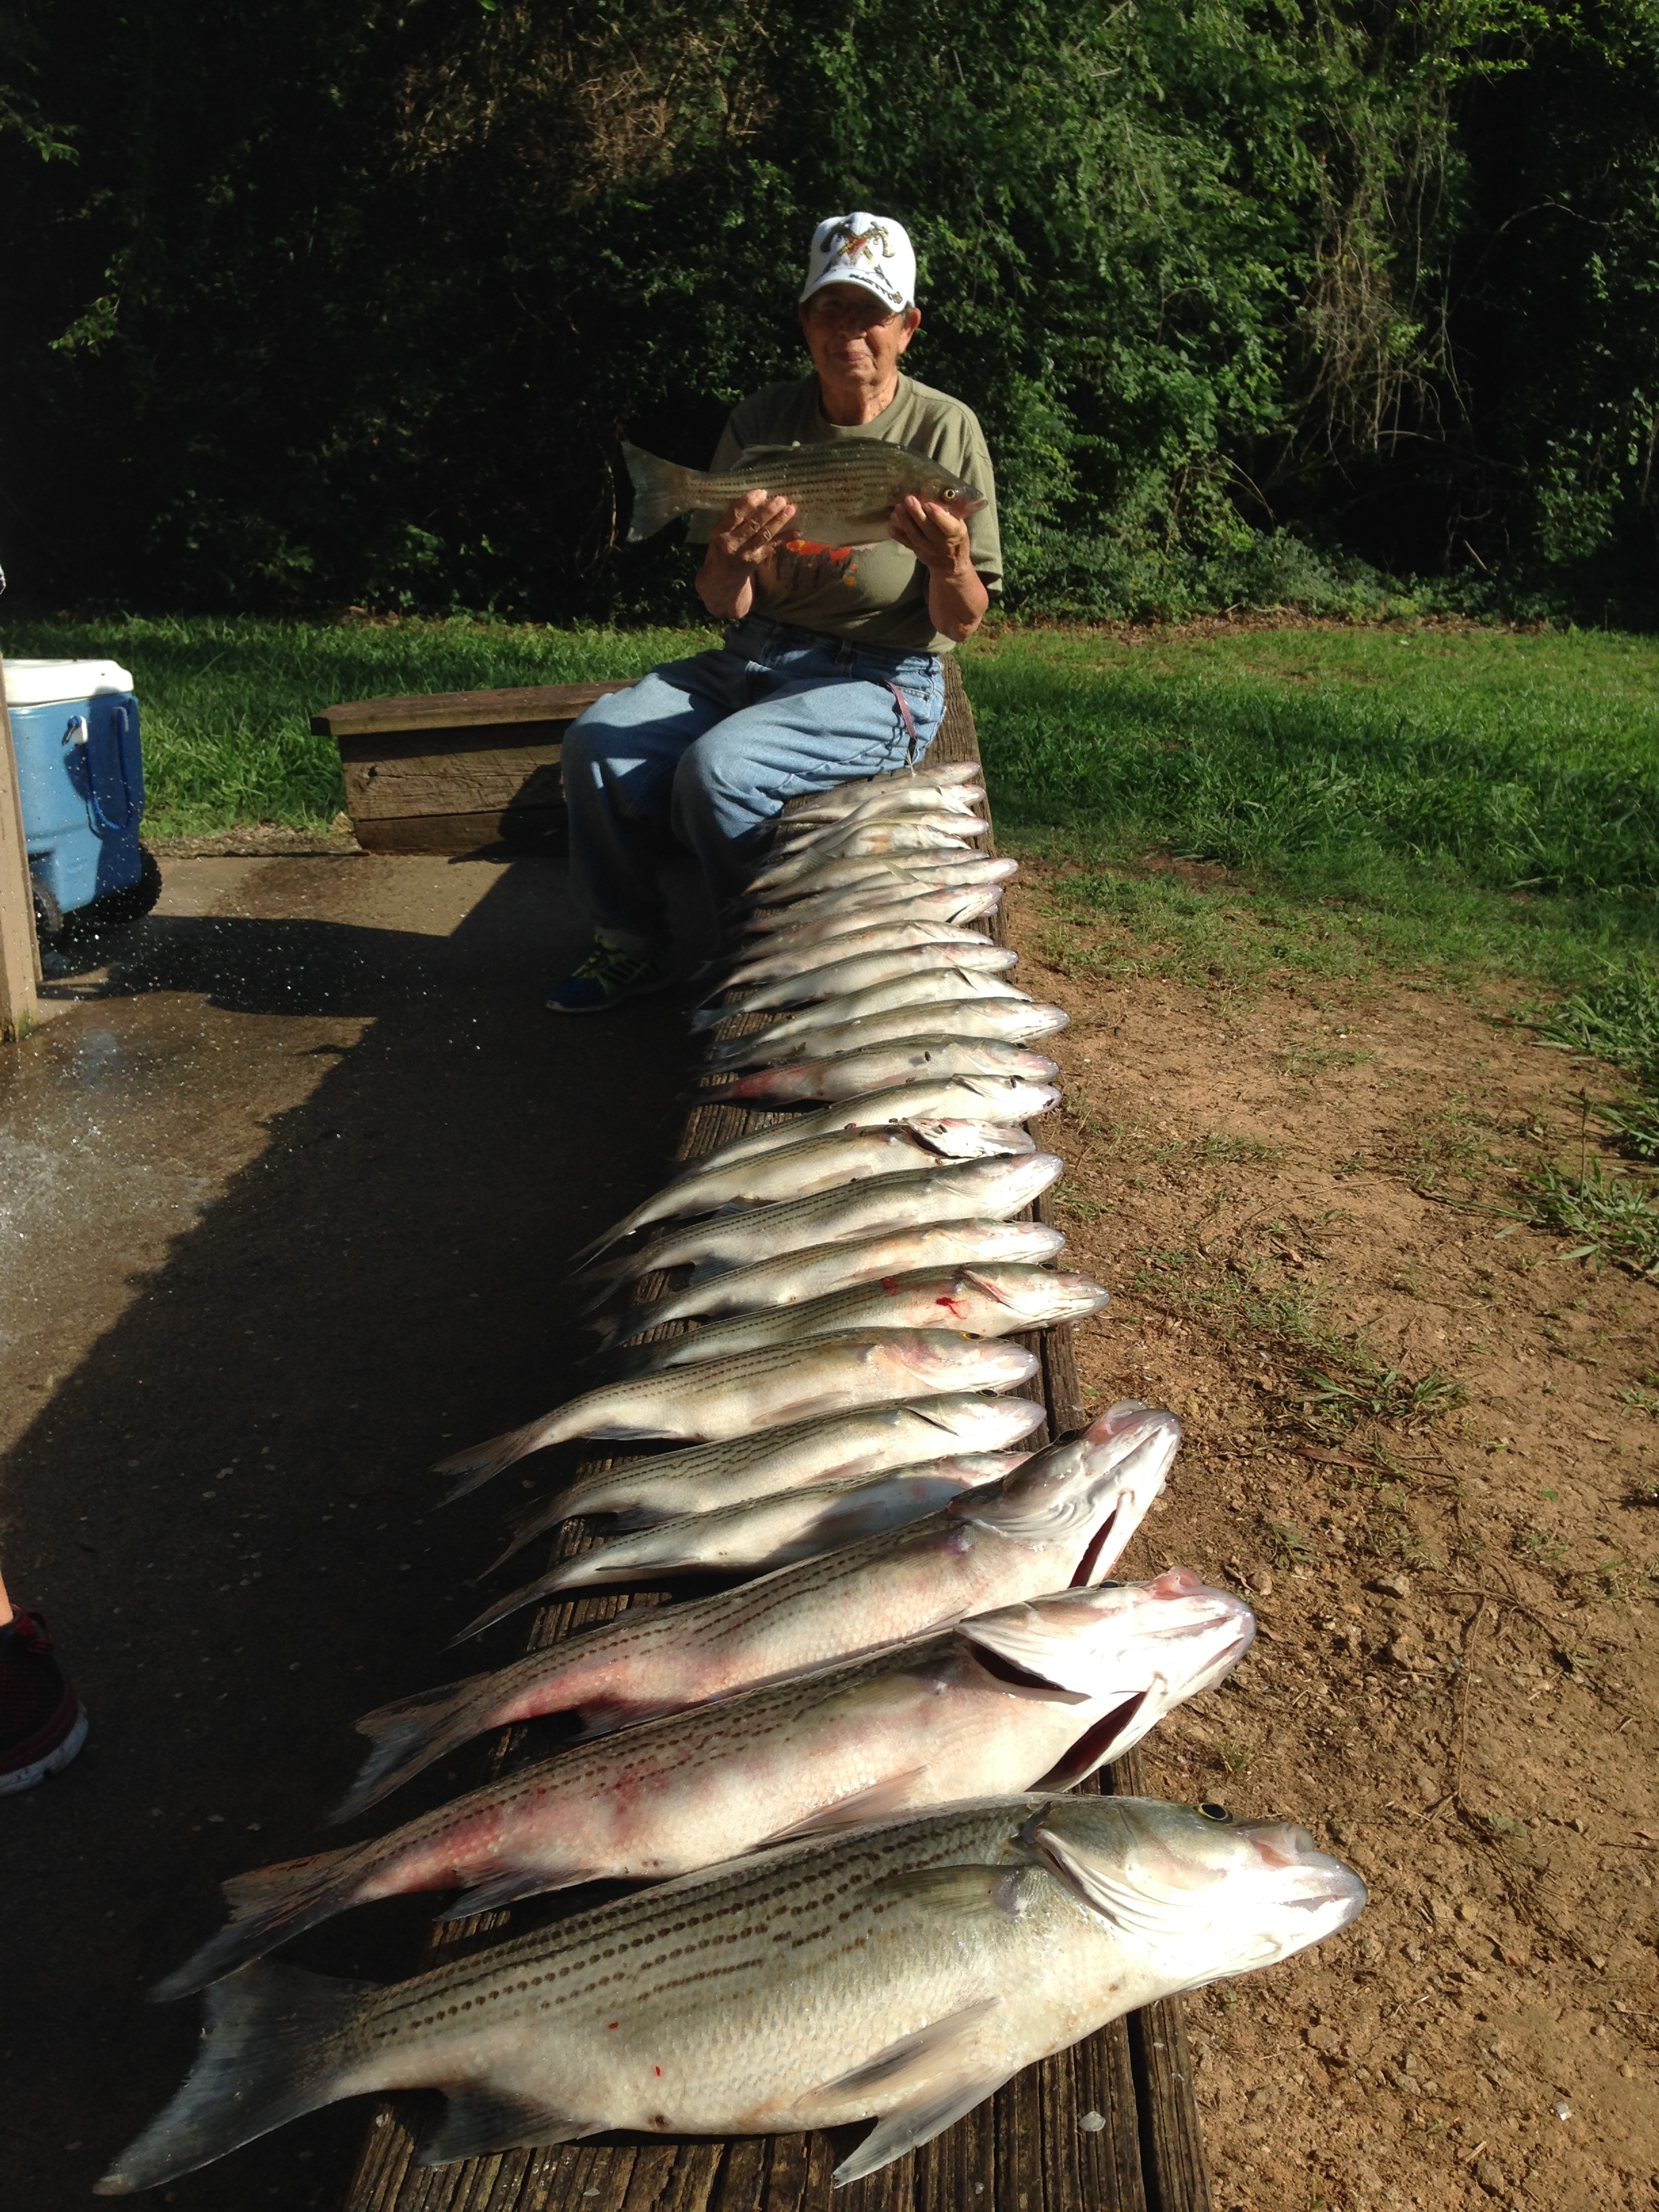 June 3, 2017 Bonnie Jackson with 30 stripers that she caught with Larry Freeman and captain Billy